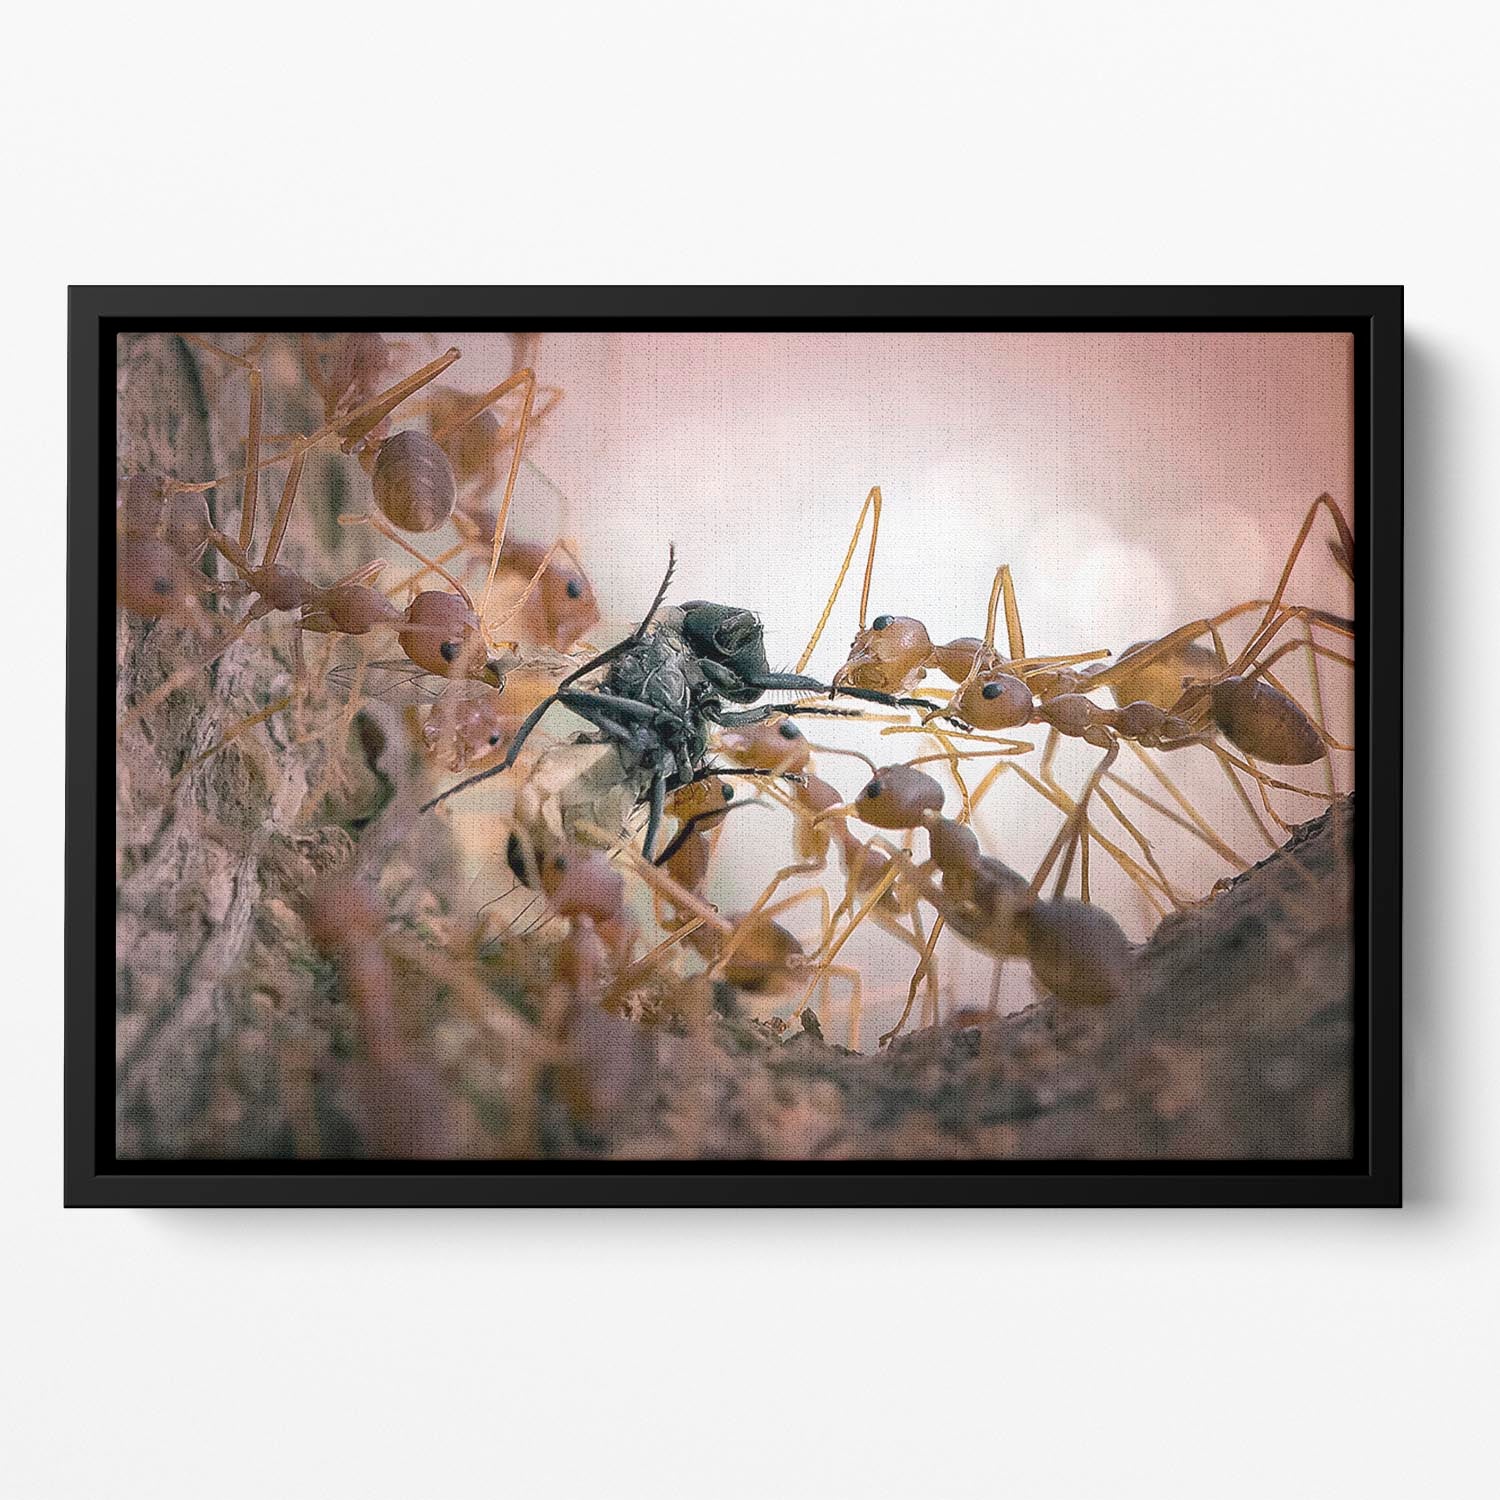 Close p Of Insects Floating Framed Canvas - Canvas Art Rocks - 2